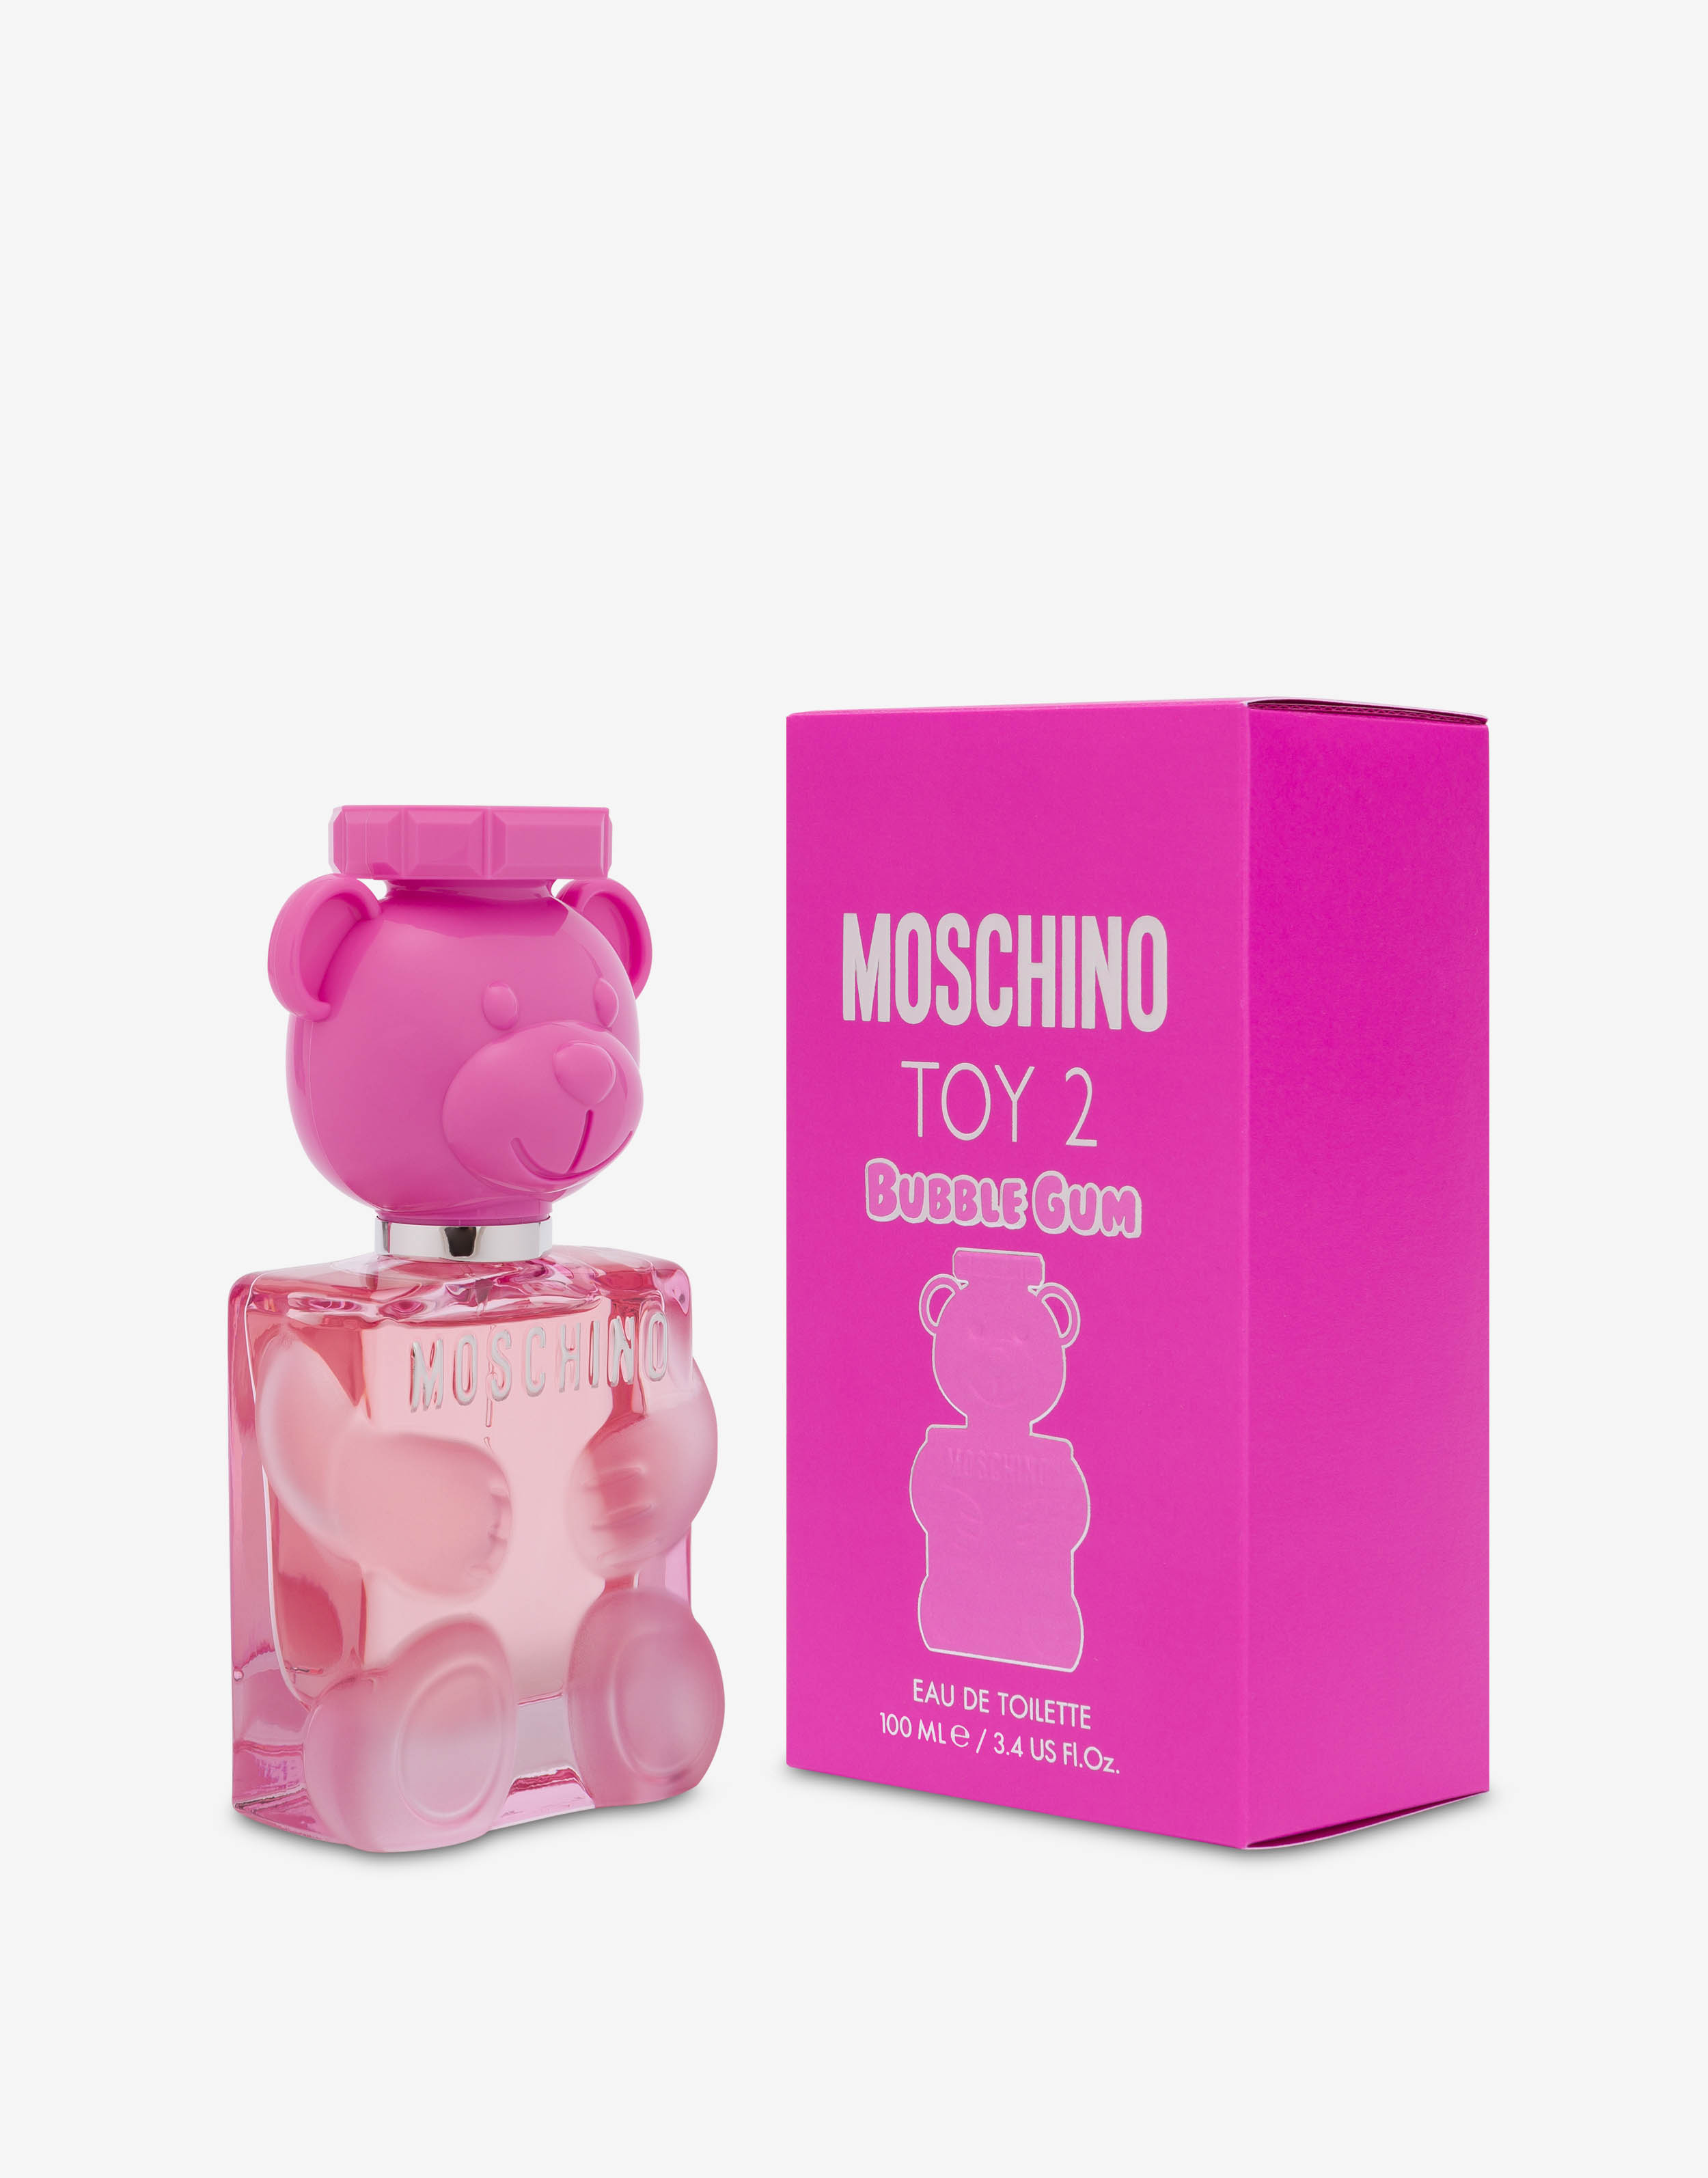 Child's Play: TOY by Moschino